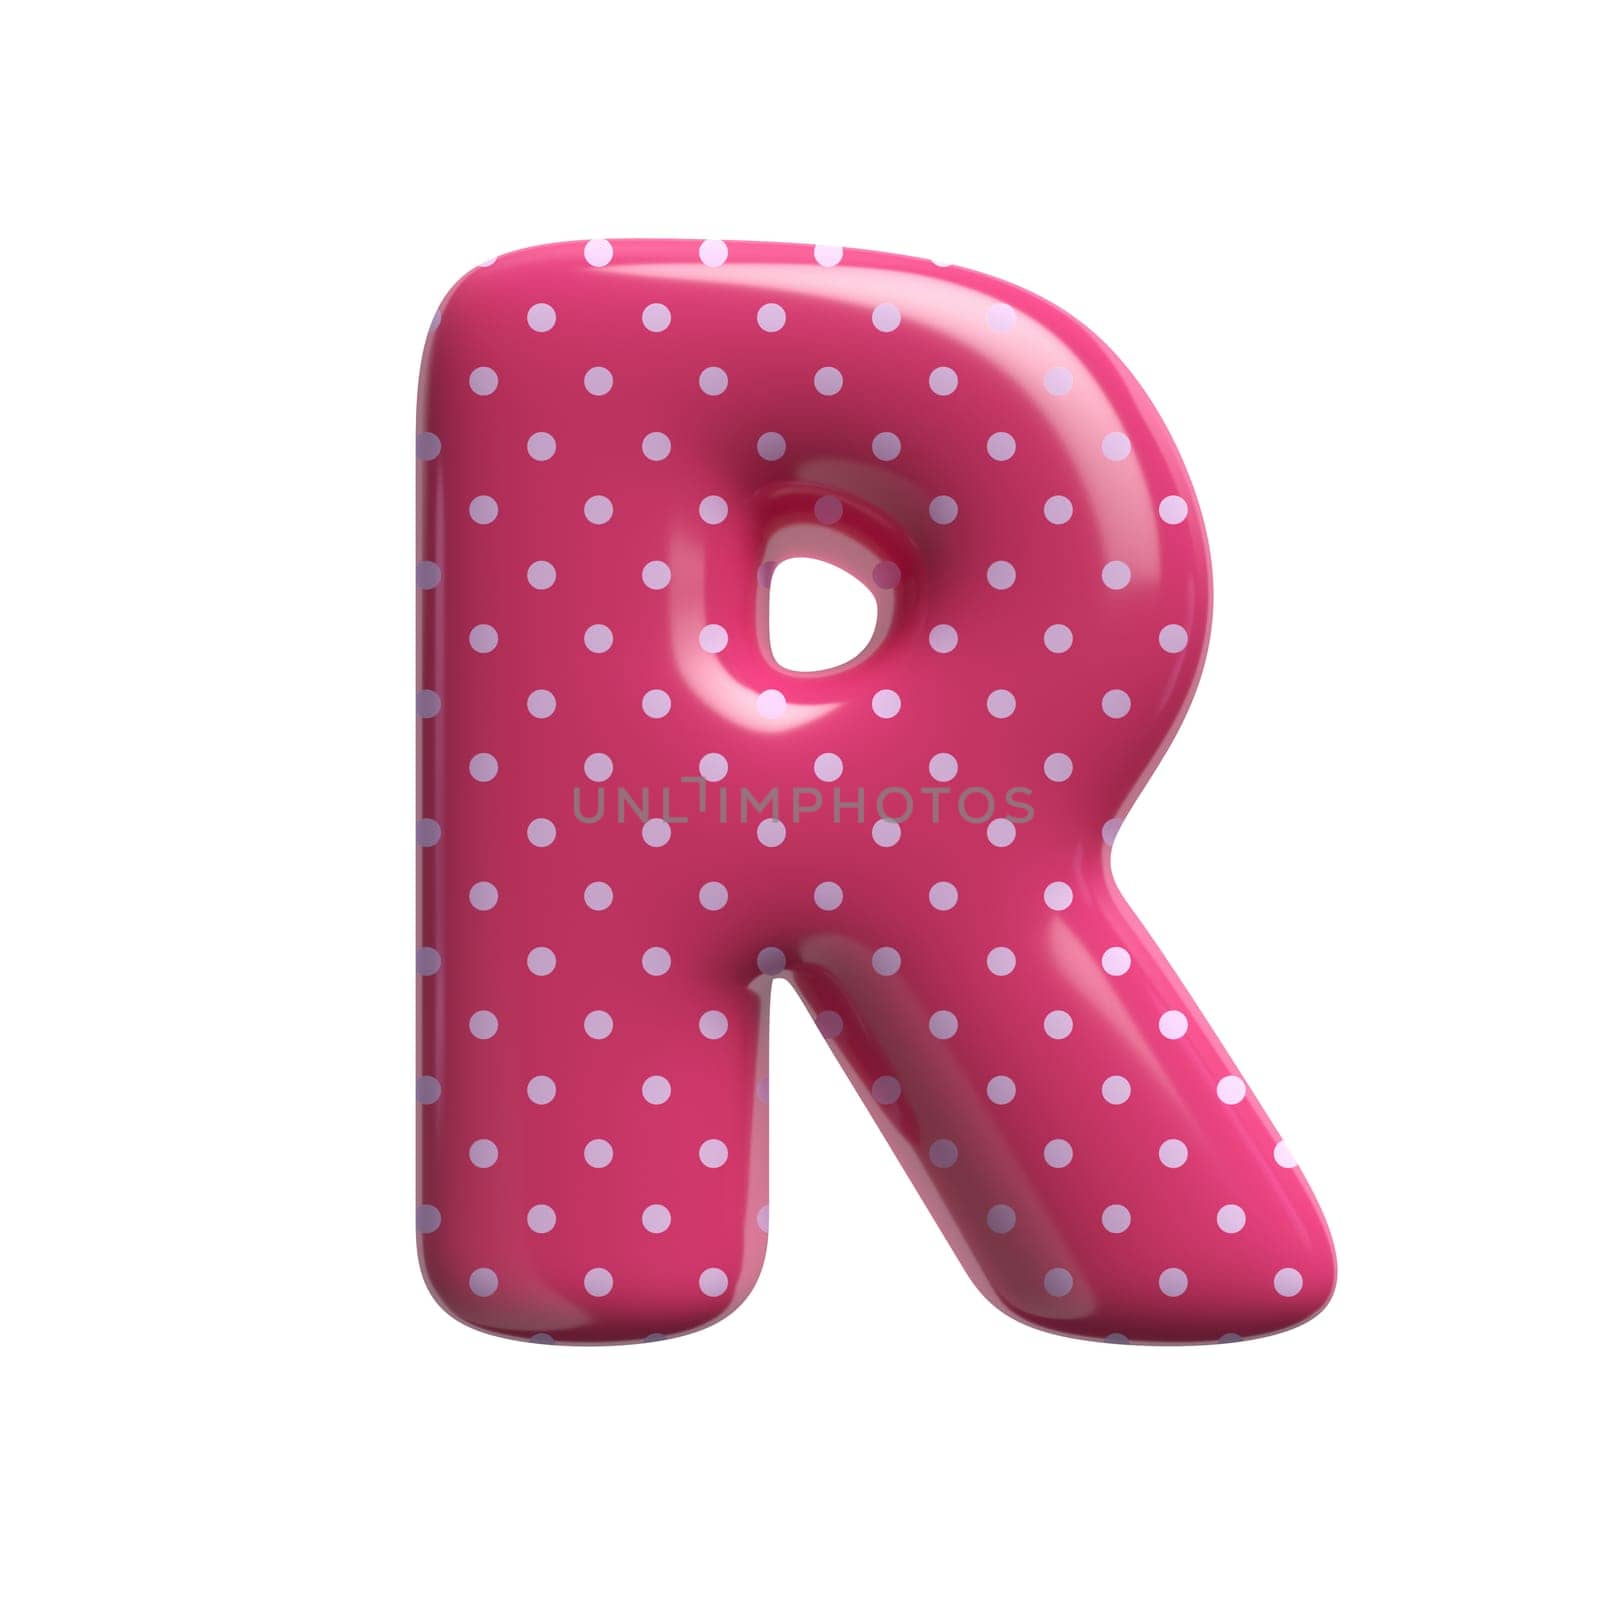 Polka dot letter R - Uppercase 3d pink retro font - suitable for Fashion, retro design or decoration related subjects by chrisroll